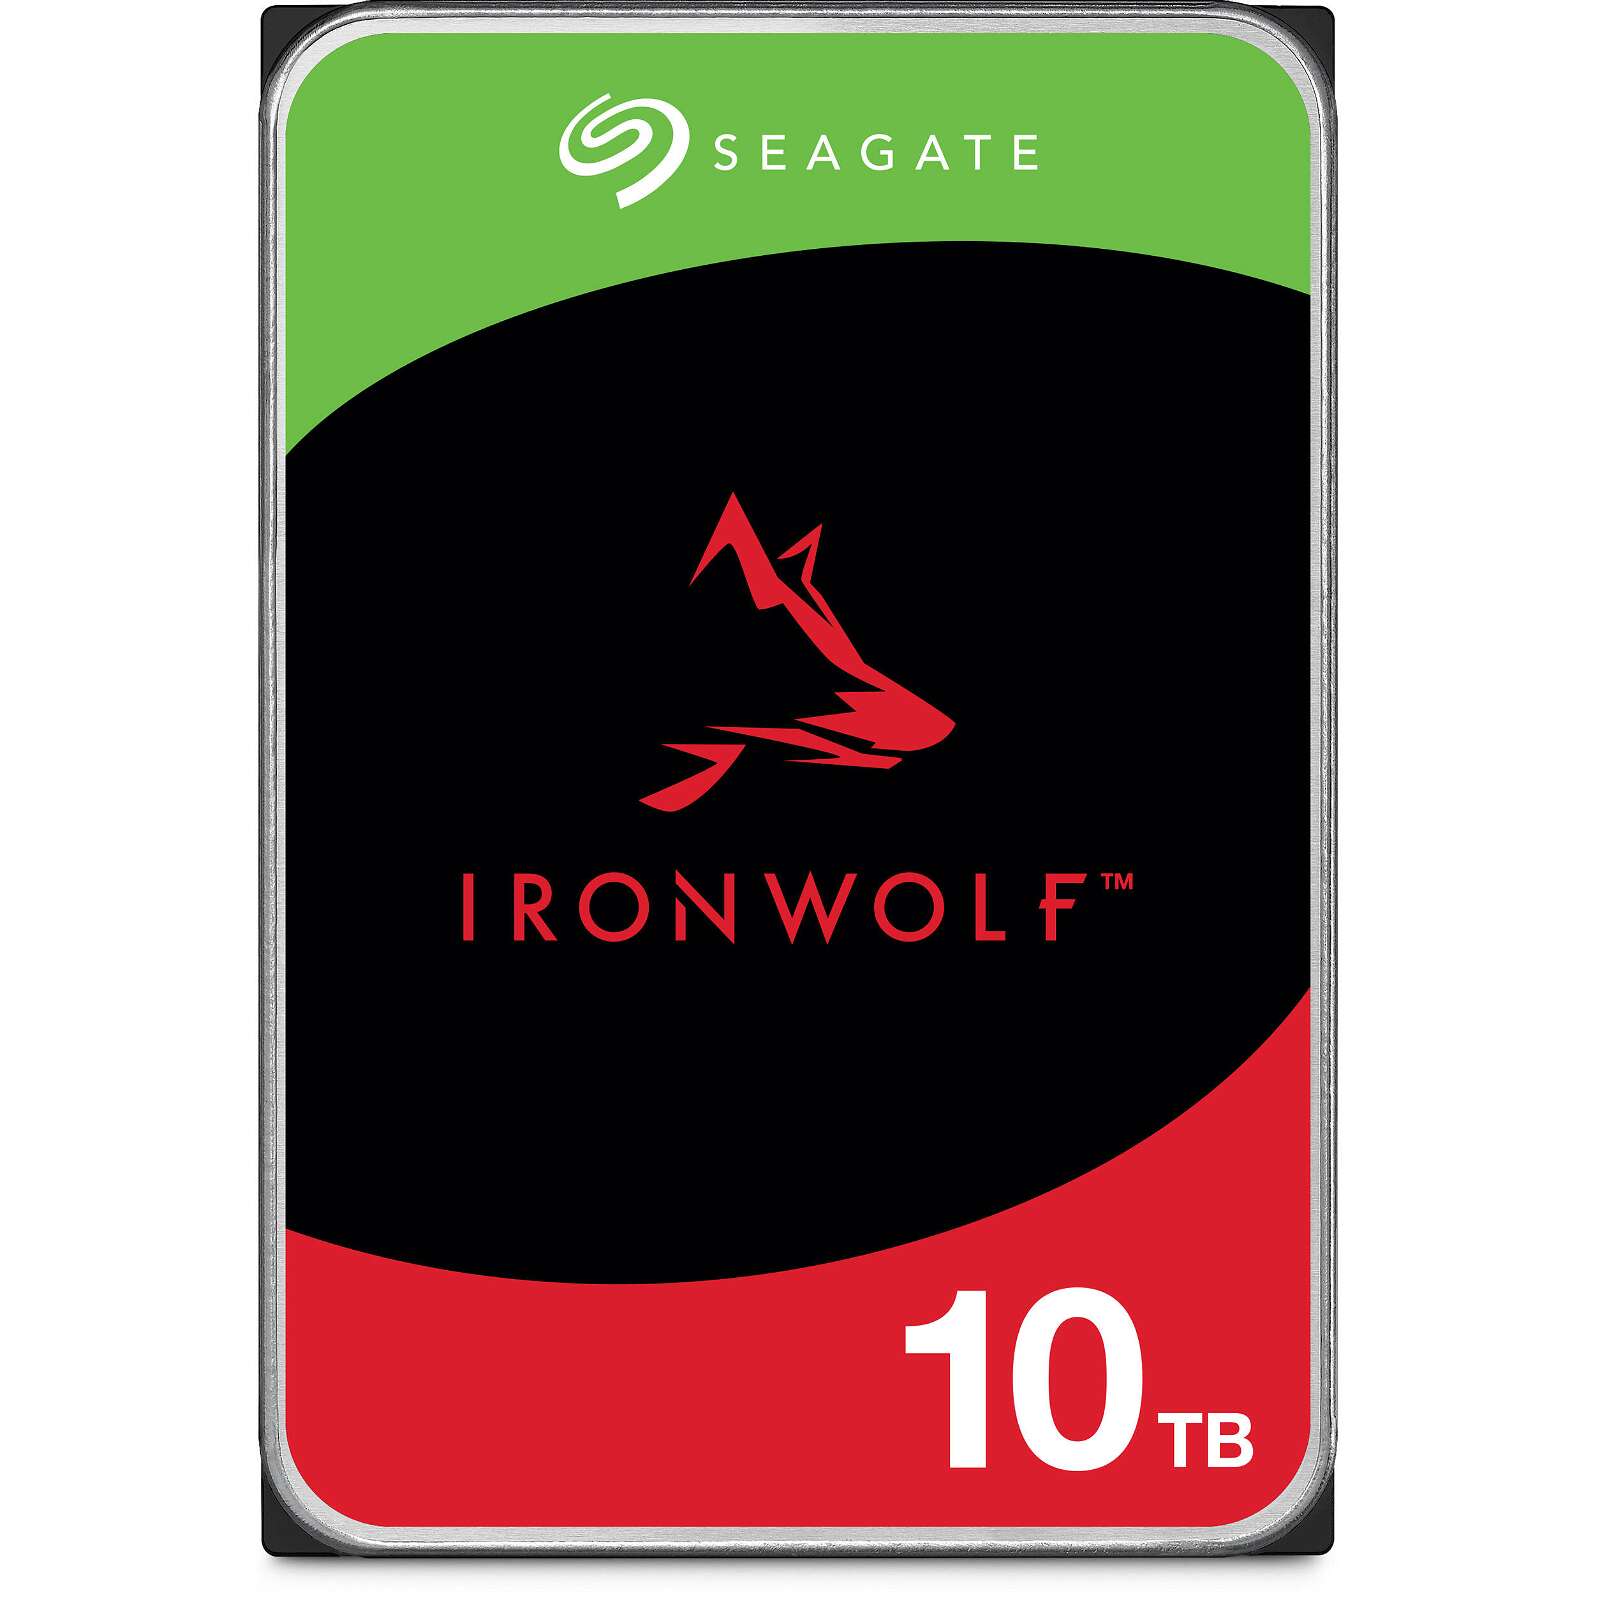 10tb seagate ironwolf st10000vn000 7200rpm 256mb nas (st10000vn000)